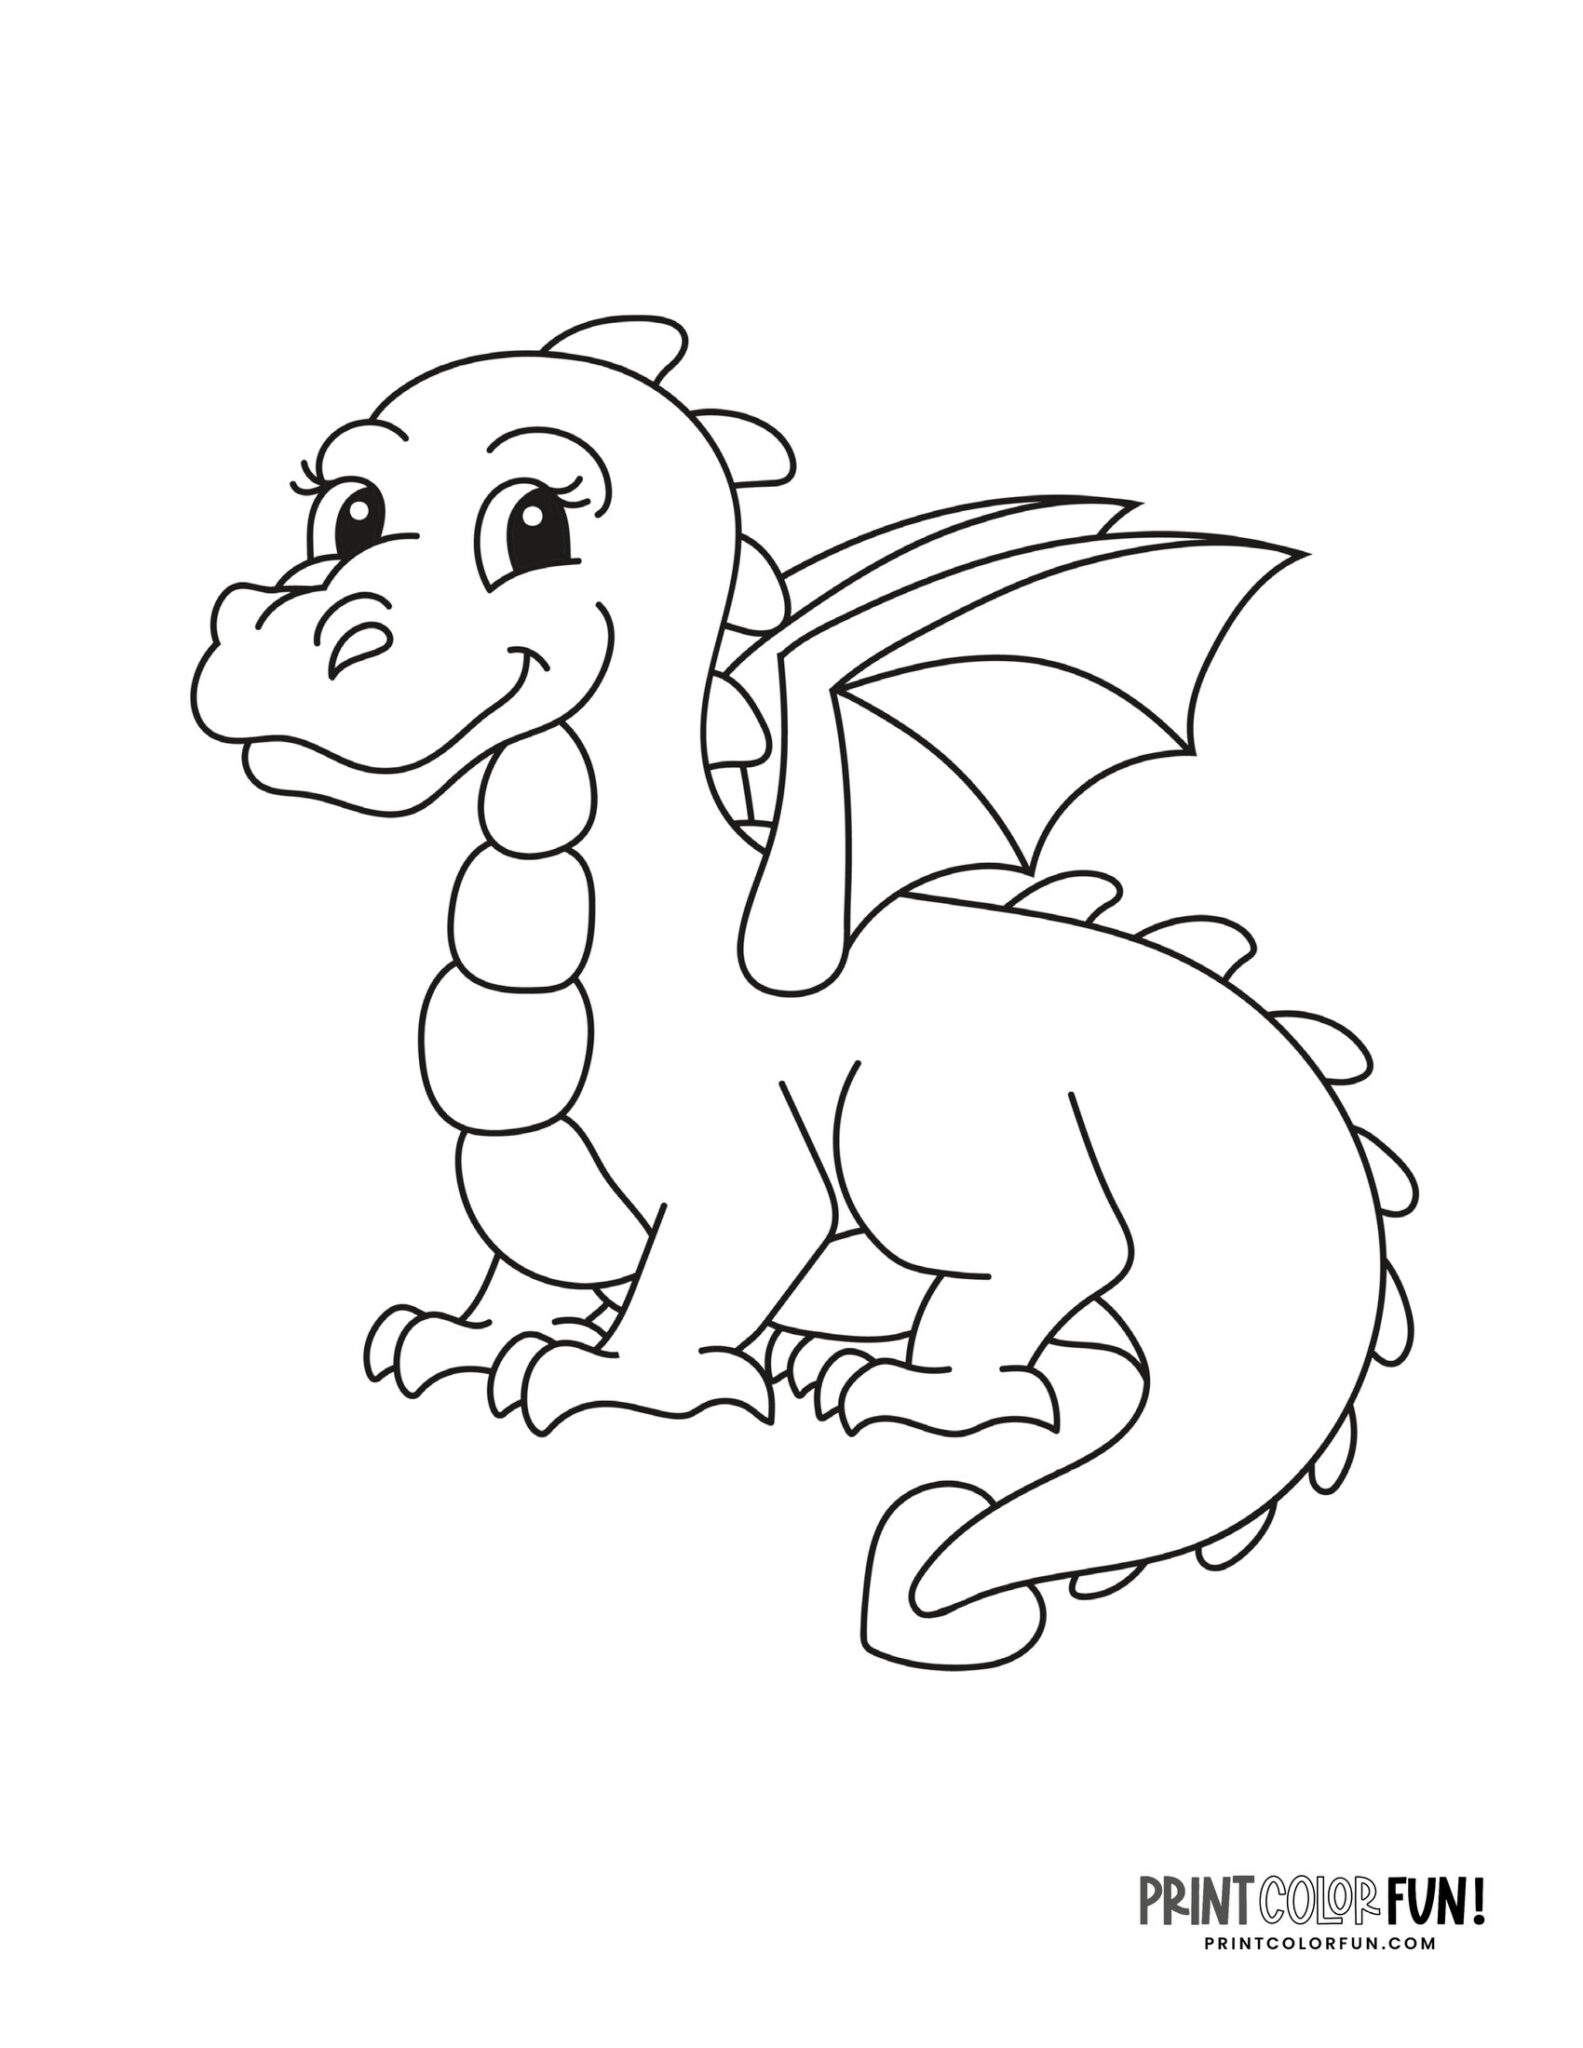 14 dragon coloring pages + clipart crafting fun: A magical adventure ...